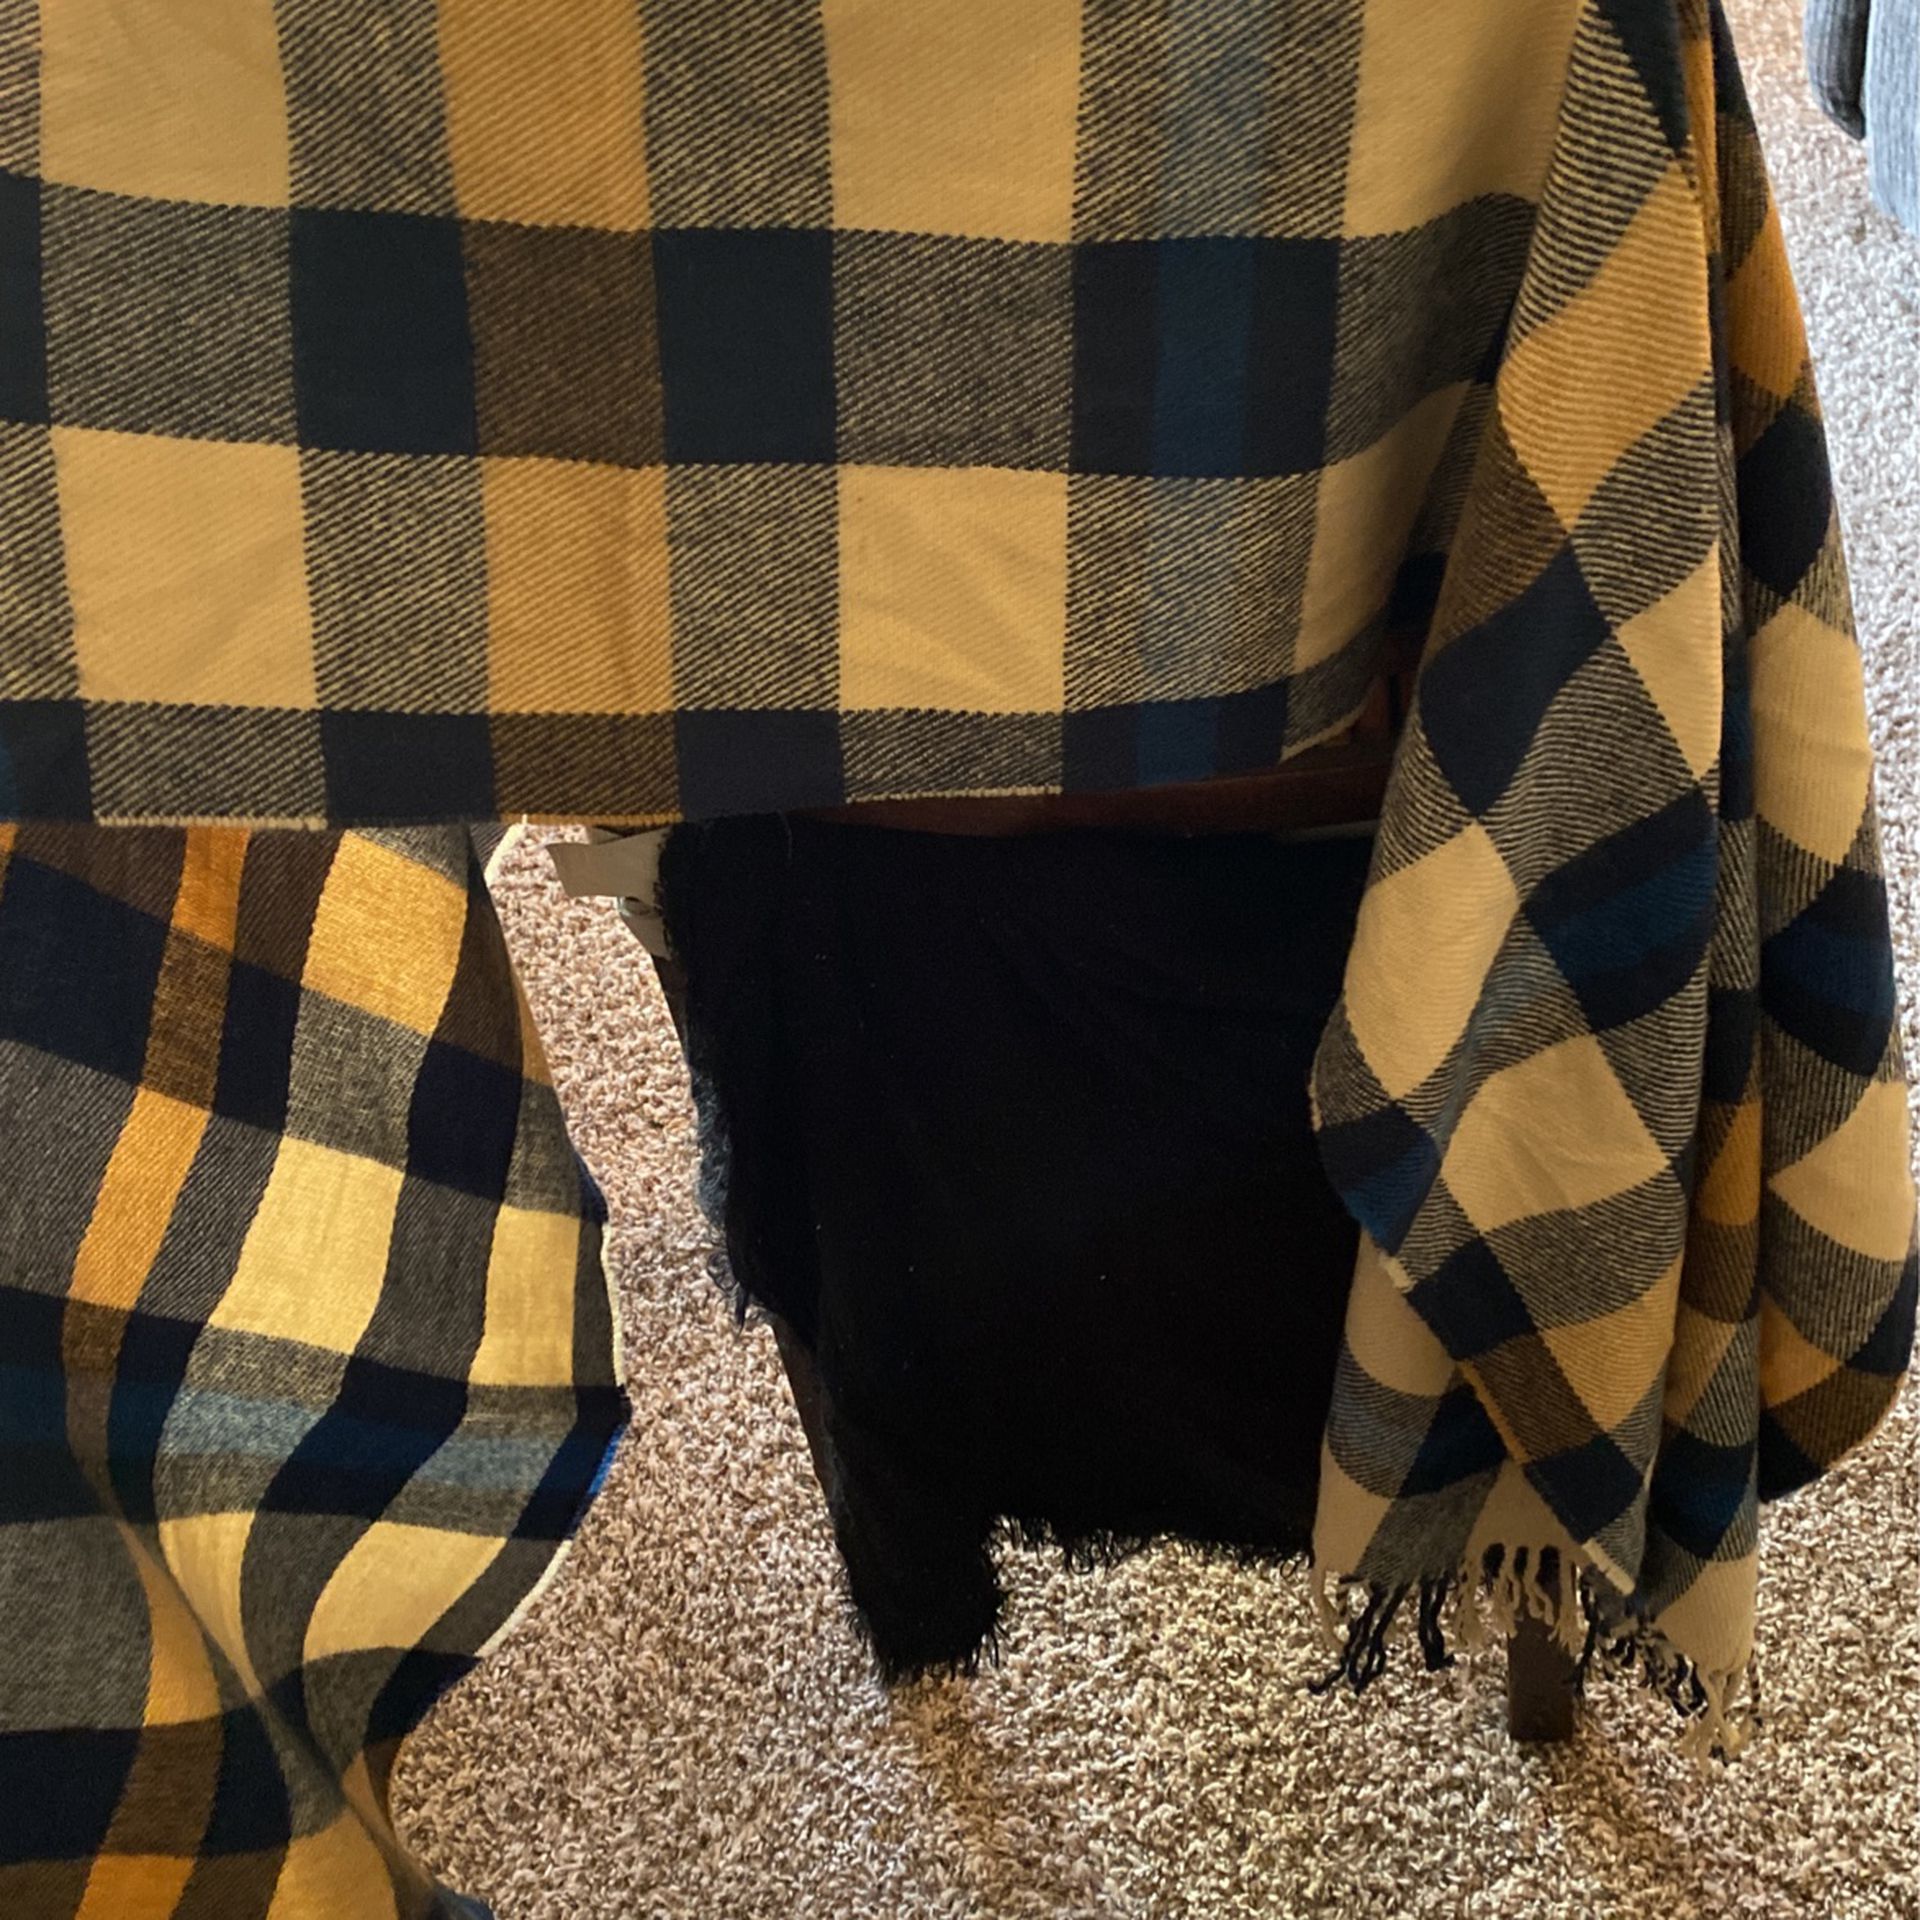 Plaid scarf with brown and black in colors